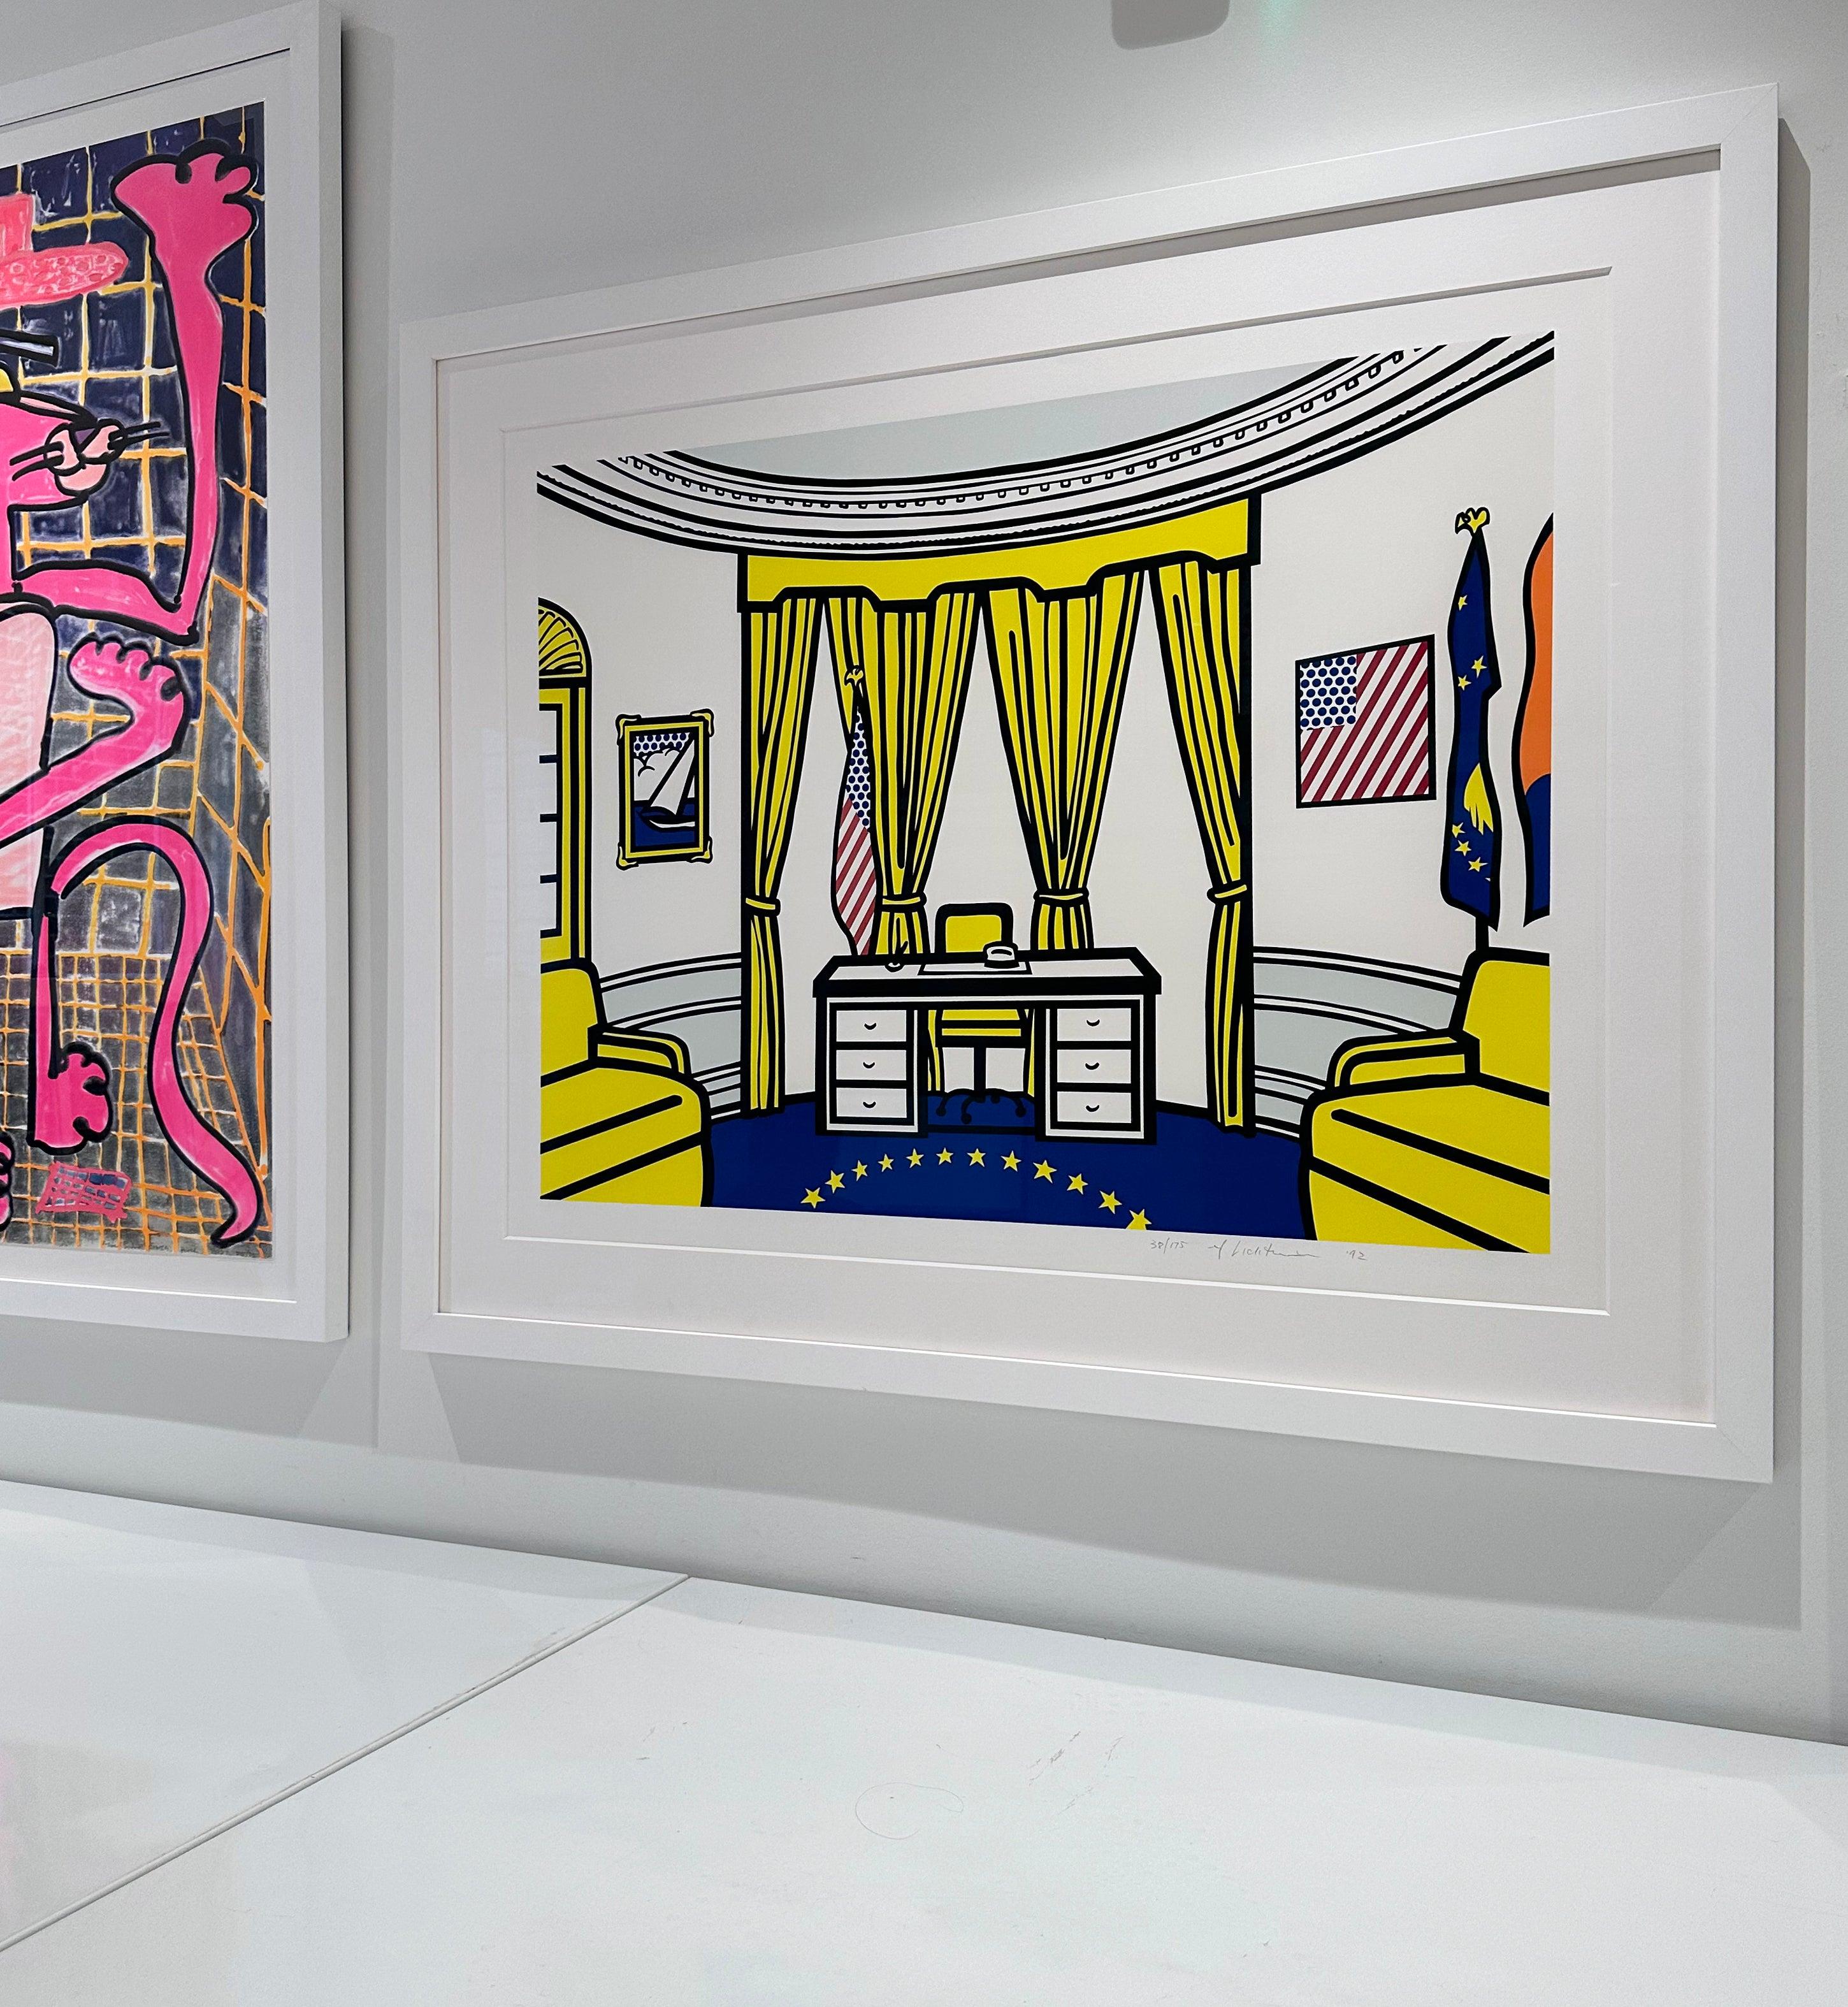 Artist: Roy Lichtenstein
Title: Oval Office
Medium: Screenprint in colors on Rives BFK paper
Year: 1992
Edition: 38/175
Frame Size: 42 3/4